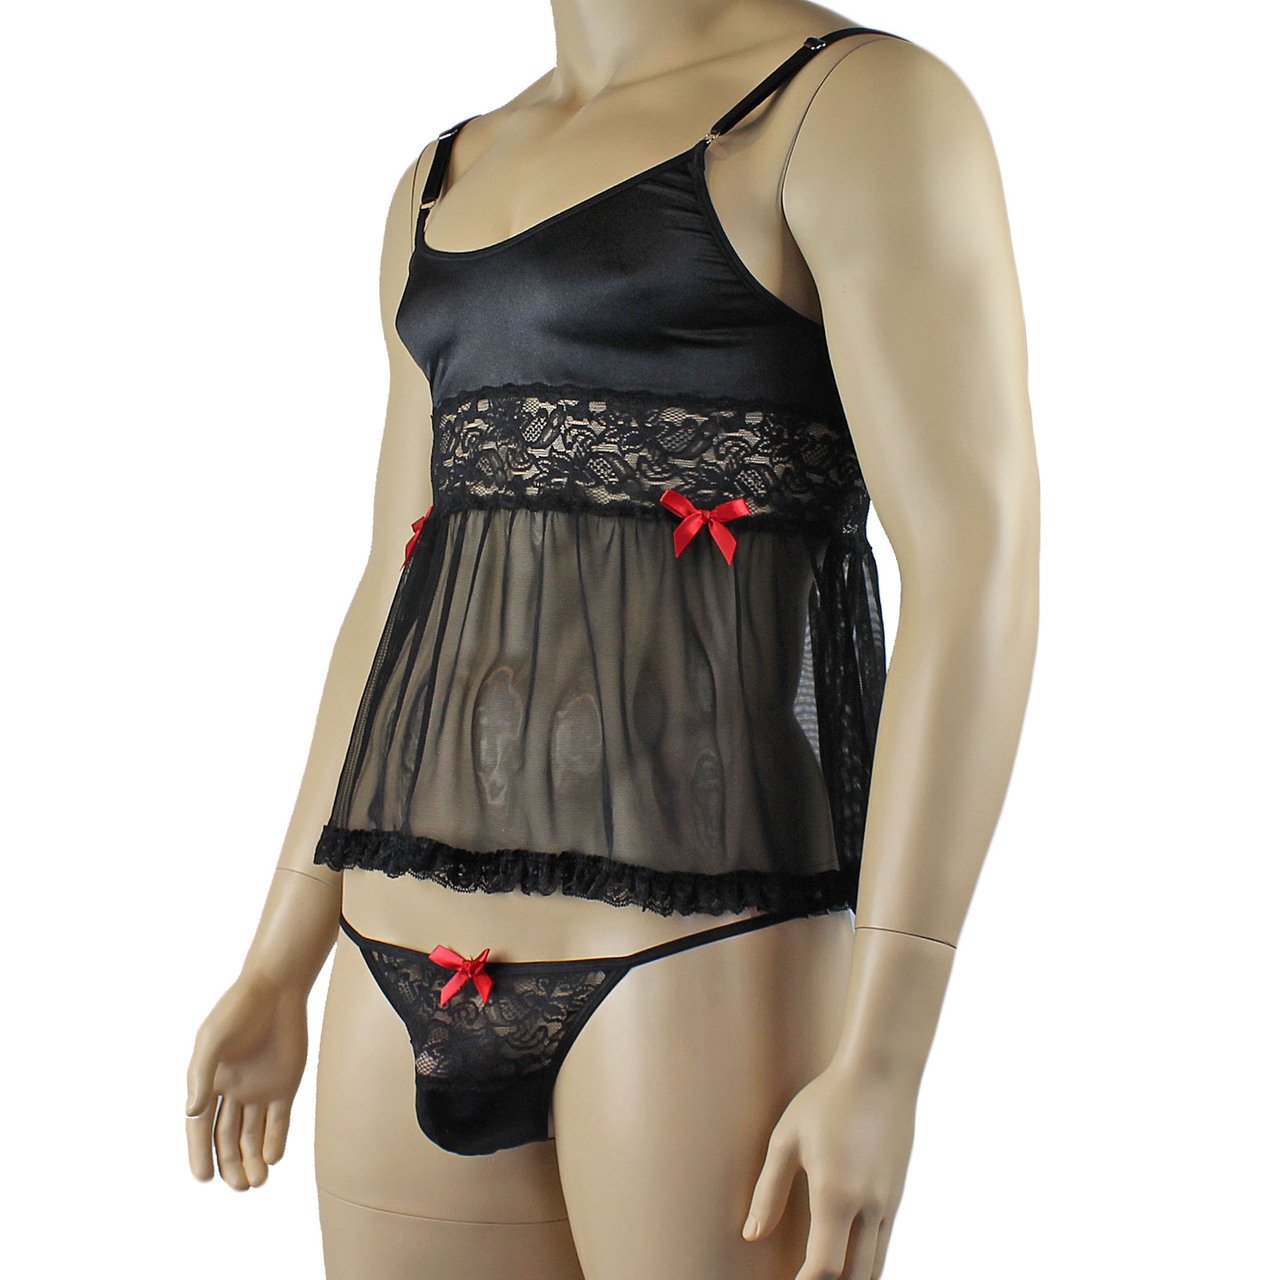 Mens Joanne Mini Babydoll Camisole & G string - Sizes up to 3XL (lblack plus other colours)